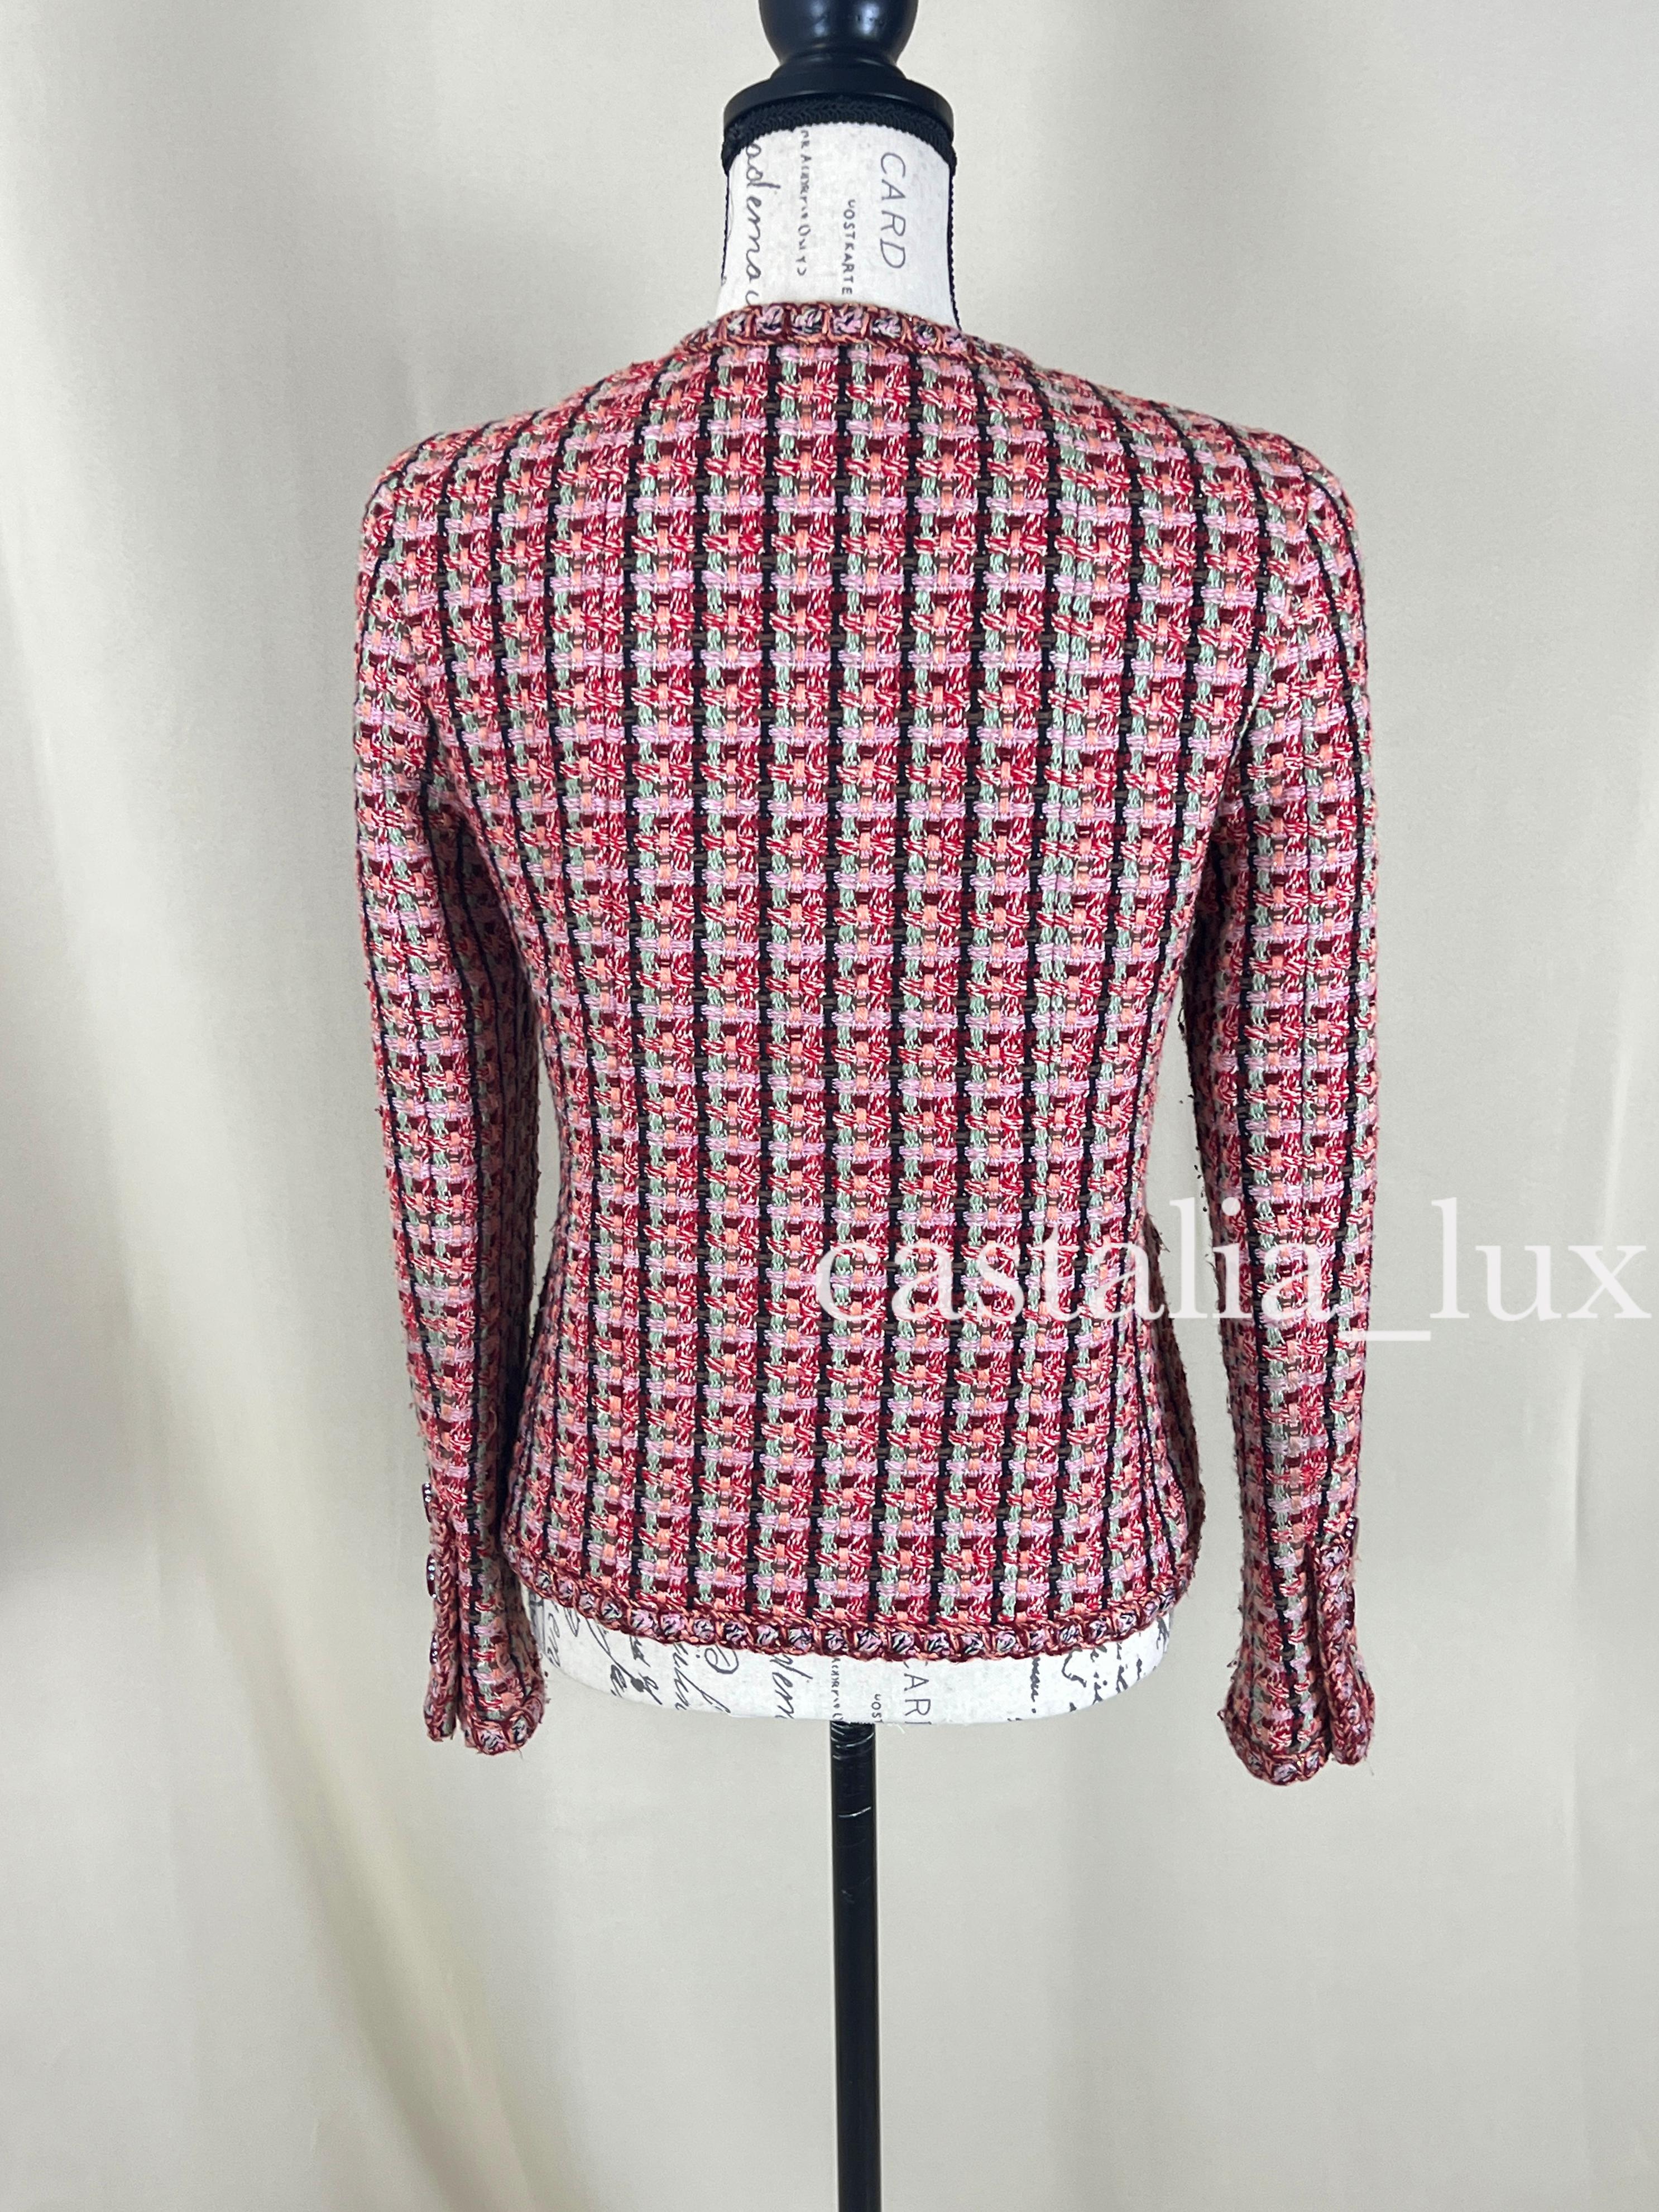 Chanel Collectible 4-Pockets Tweed Jacket For Sale 7